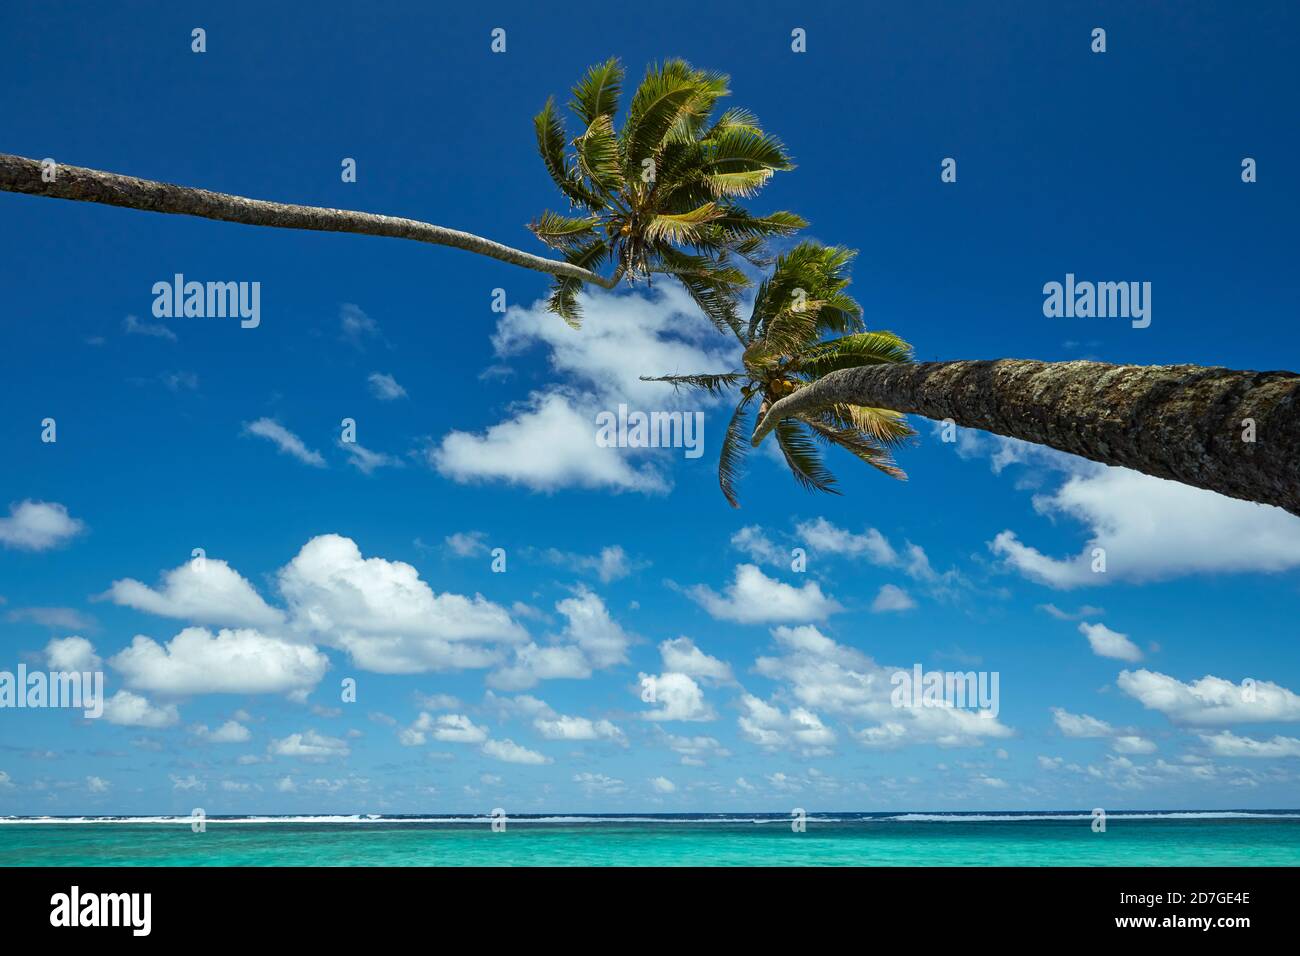 Two coconut palm trees and Pacific Ocean, Rarotonga, Cook Islands, South Pacific Stock Photo